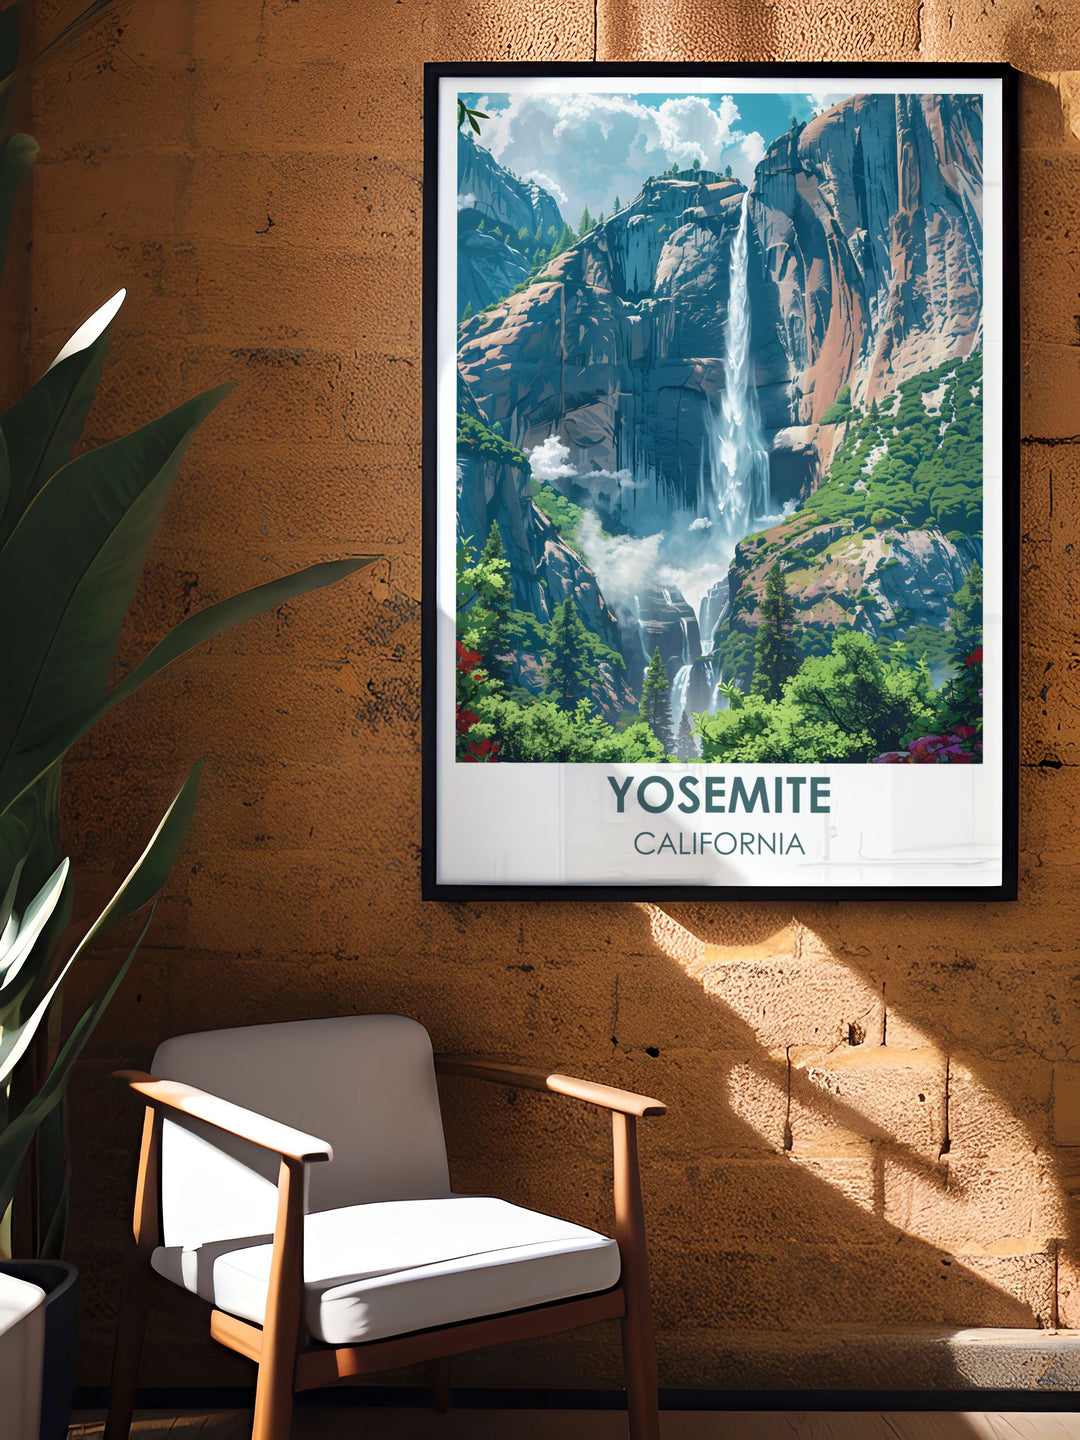 This Yosemite travel poster features the iconic El Capitan, with its sheer granite cliffs illuminated by the golden light of dawn, making it an ideal addition to any collection of national park prints.